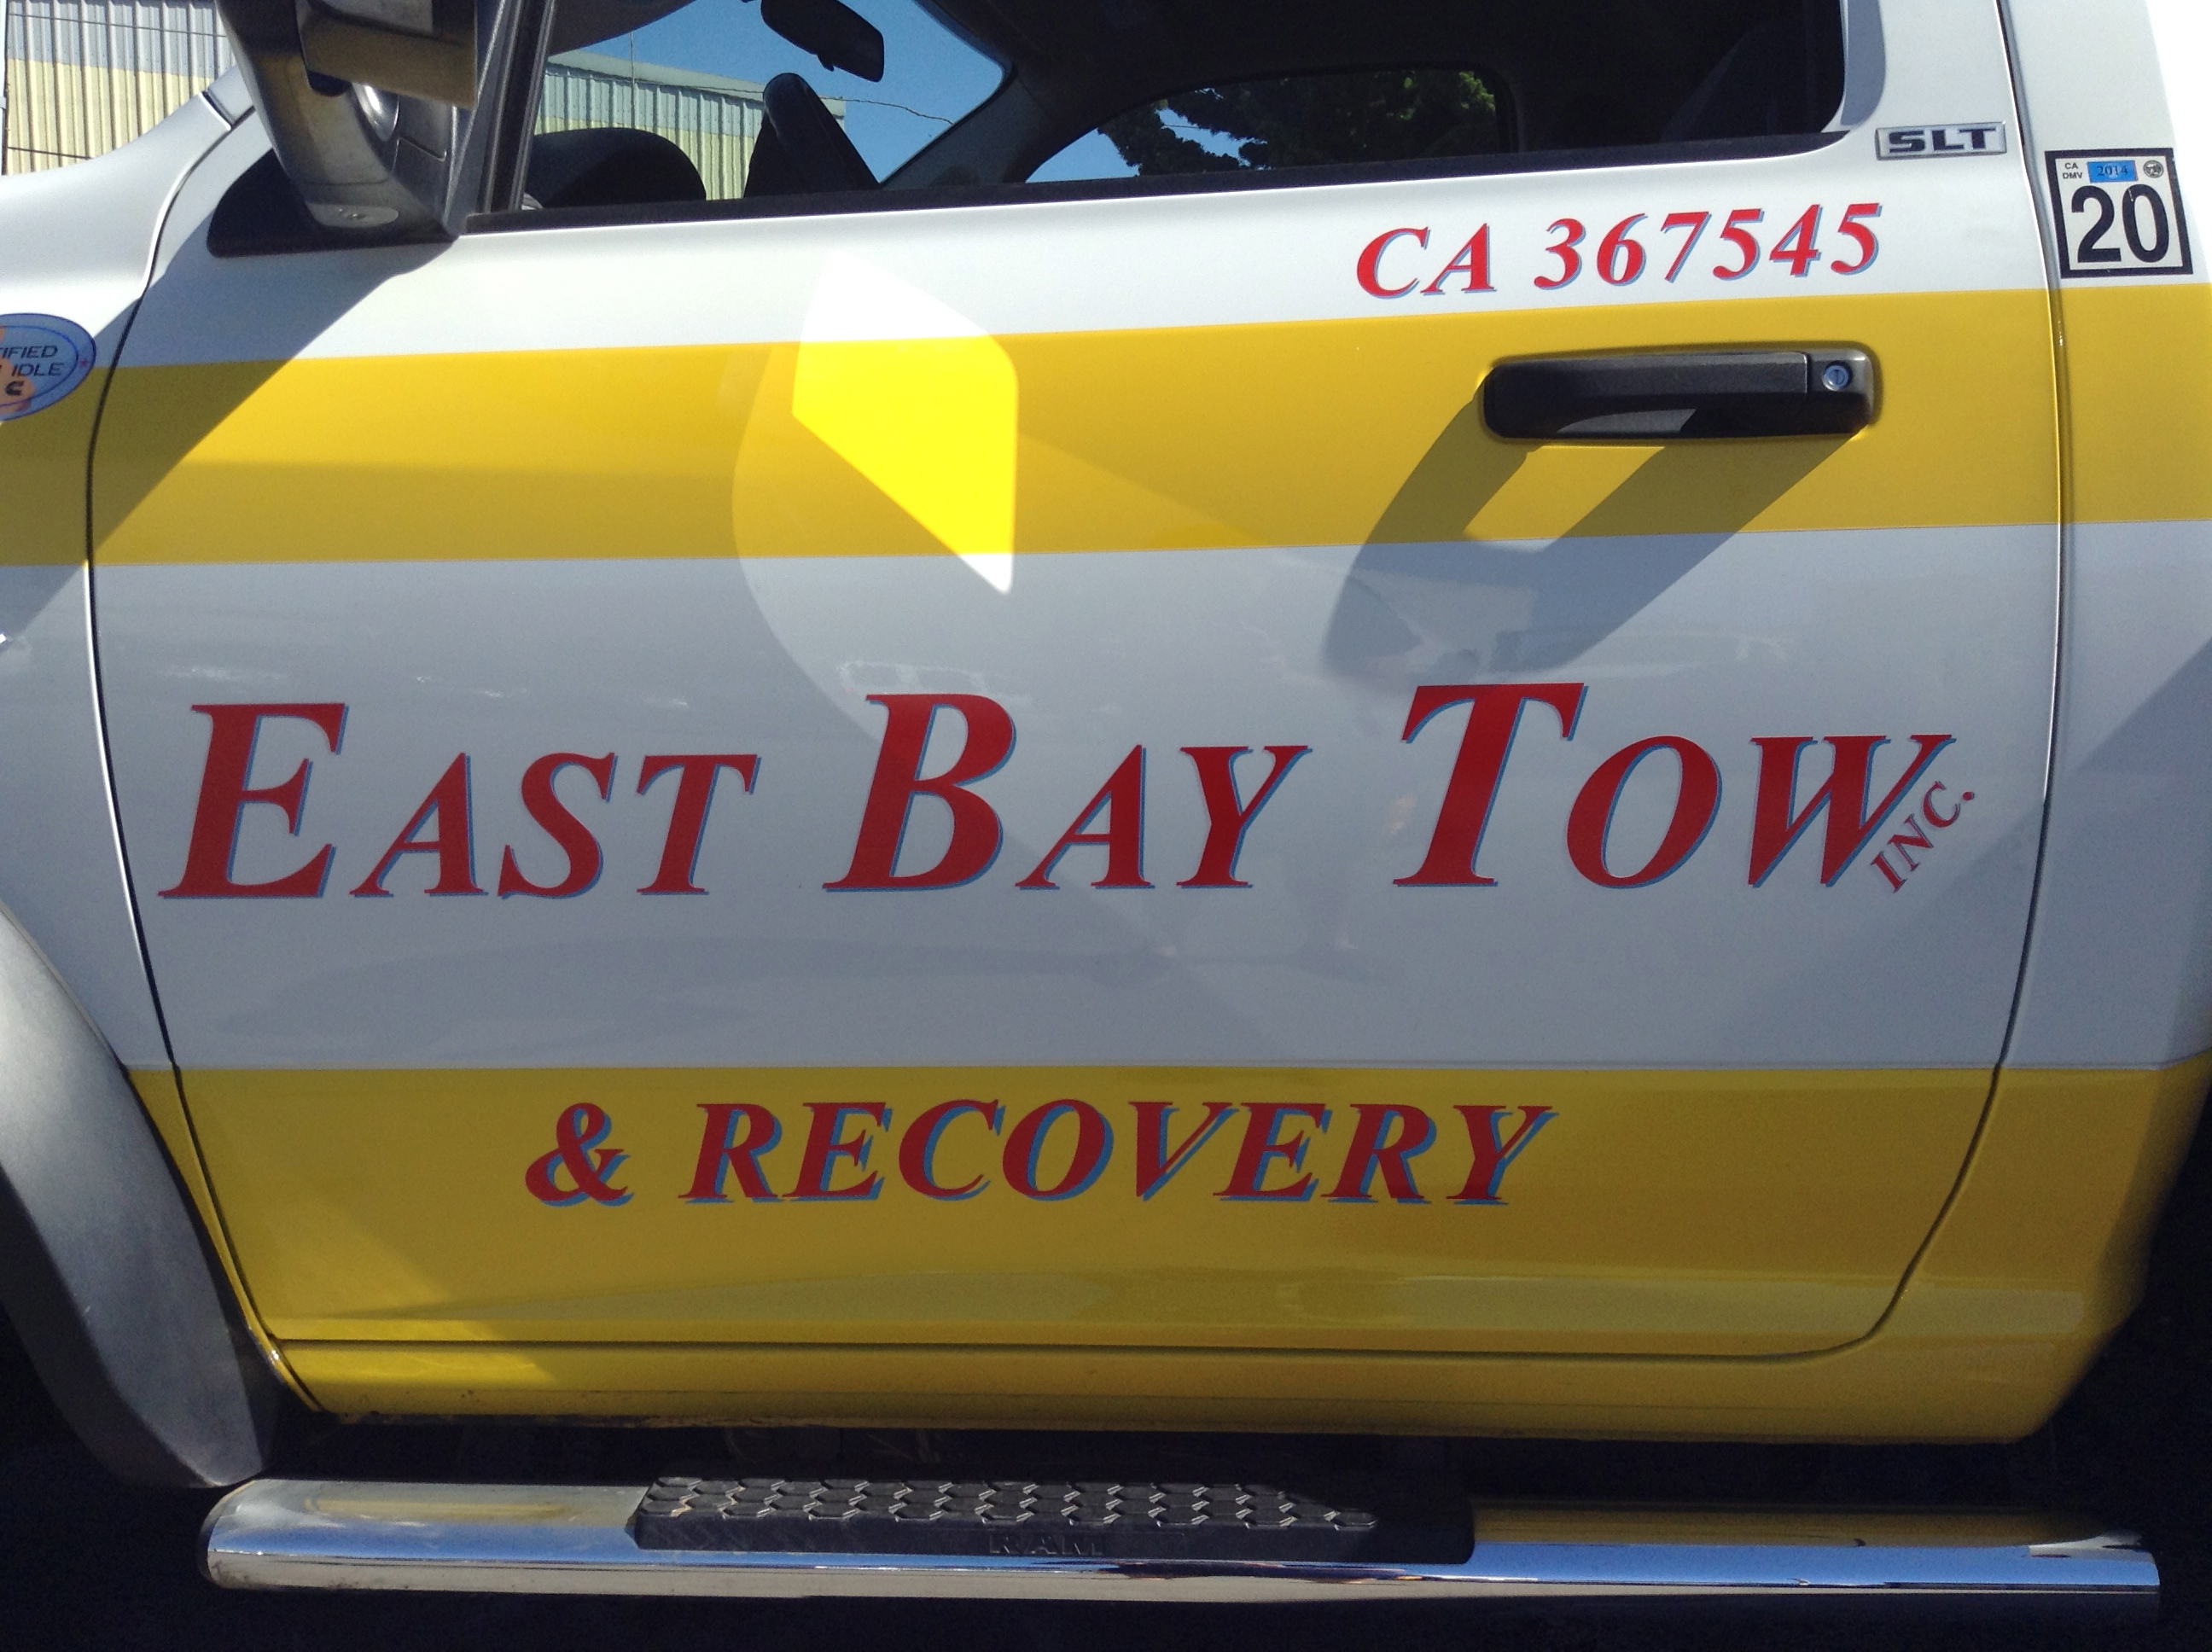 East Bay Tow, Inc.
Available 24 hours a day, seven days a week, our team of nationally-trained drivers is always available to tow or recover your vehicle and get you and your passengers on your way to your next destination or repair shop.  We can help you with everything from tire changes and lockouts, to jump starts and towing. If you find yourself involved in the unfortunate situation of an on or off-road accident or rollover, count on East Bay Tow for fast, dependable towing and recovery operations.
For peace of mind, you can feel secure knowing all of our drivers undergo background checks and random drug testing and comply with the strictest standards in the industry to compete with the top drivers in the country.  Do you manage or own private property? Hook up with East Bay Tow today for private property towing service when you need it for removal of violating vehicles. We are committed to earning your business. Please take a moment to browse our site to learn more about our company, and what we can do for you.  If you have any questions or comments, let us know by phone or e-mail. We look forward to serving you.

East Bay Tow & Recovery offers a variety of services. These include but are not limited to:

24 Hour Towing Services
24 Hour Roadside Assistance
24 Hour Accident Recovery
Light Duty Towing
Medium Duty Towing
Flatbed Towing
Winching & Extraction
Off-Road Recovery
Long Distance Towing
Motorcycle Towing
Commercial Vehicle Towing
Auto Transport
Tire Service
Battery Service
Lockout Service
Private property towing

Call (510) 559-8500 now or click eastbaytow.com to find out more!